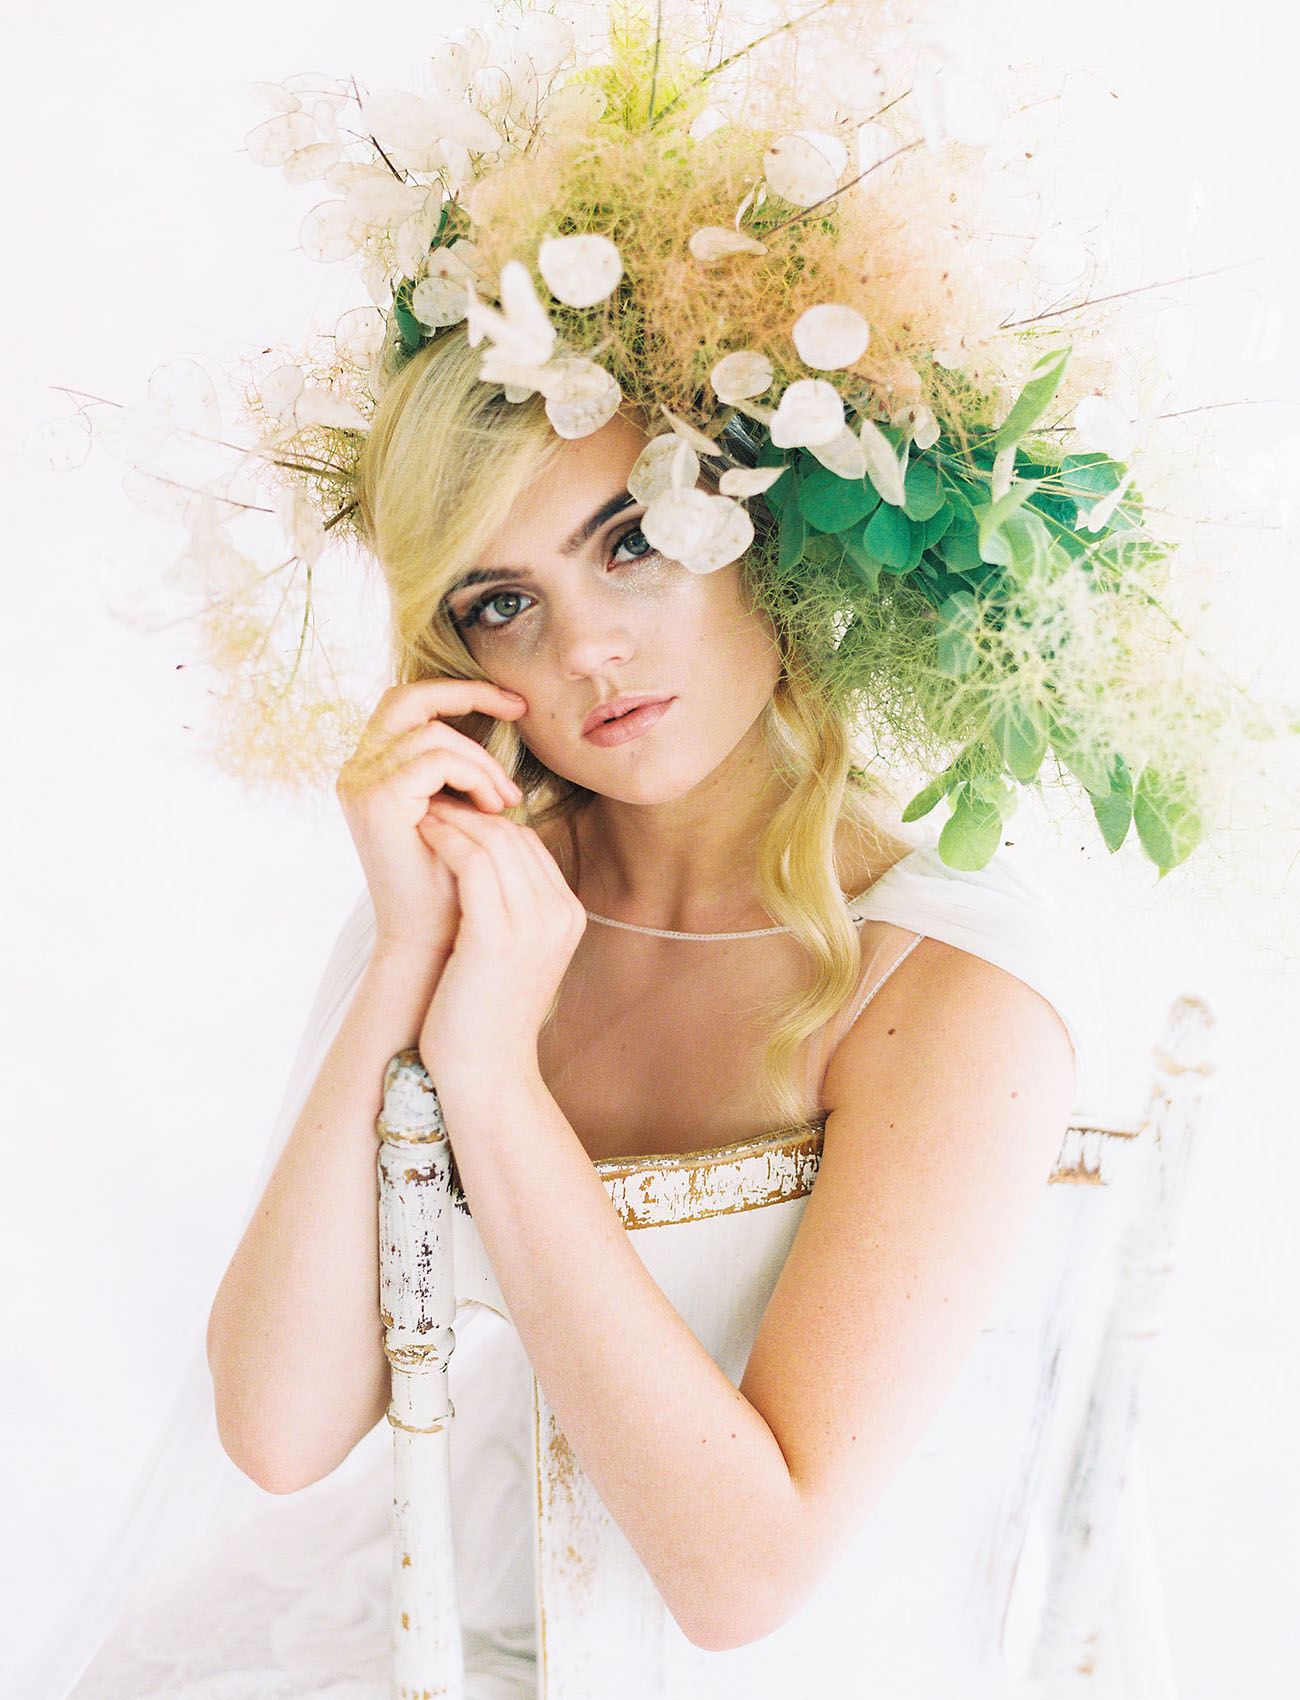 The large bridal crown was done with moss, leaves and the same blooms as the wedidng bouquet